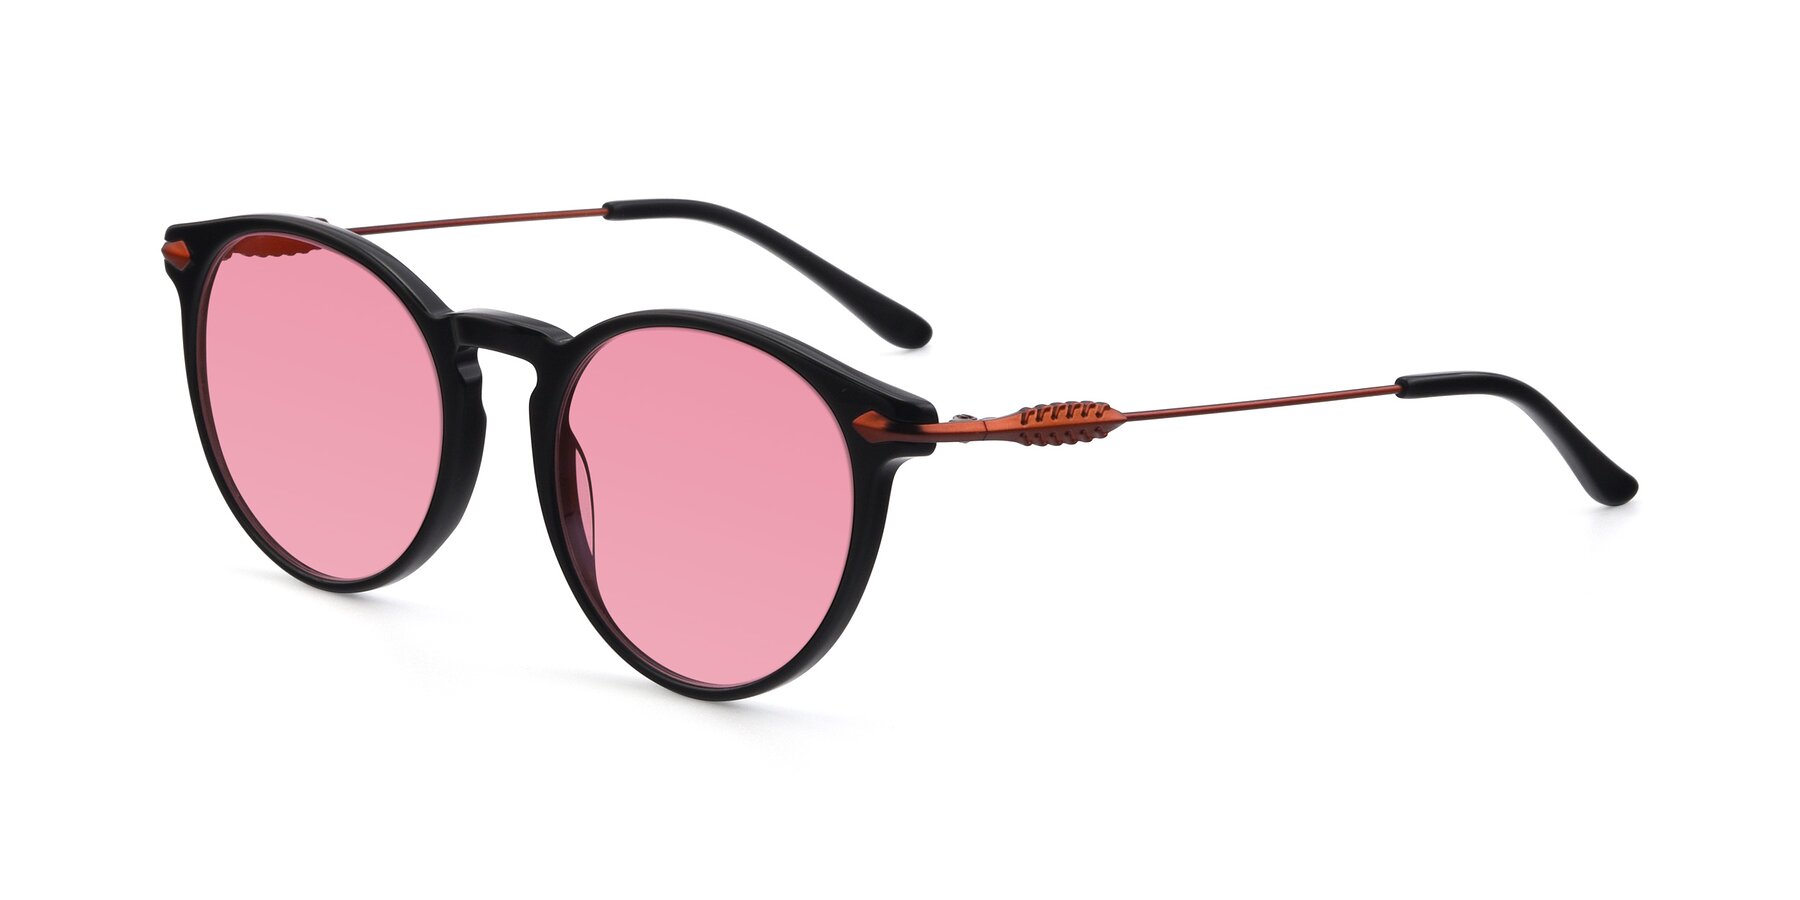 Angle of 17660 in Black with Pink Tinted Lenses